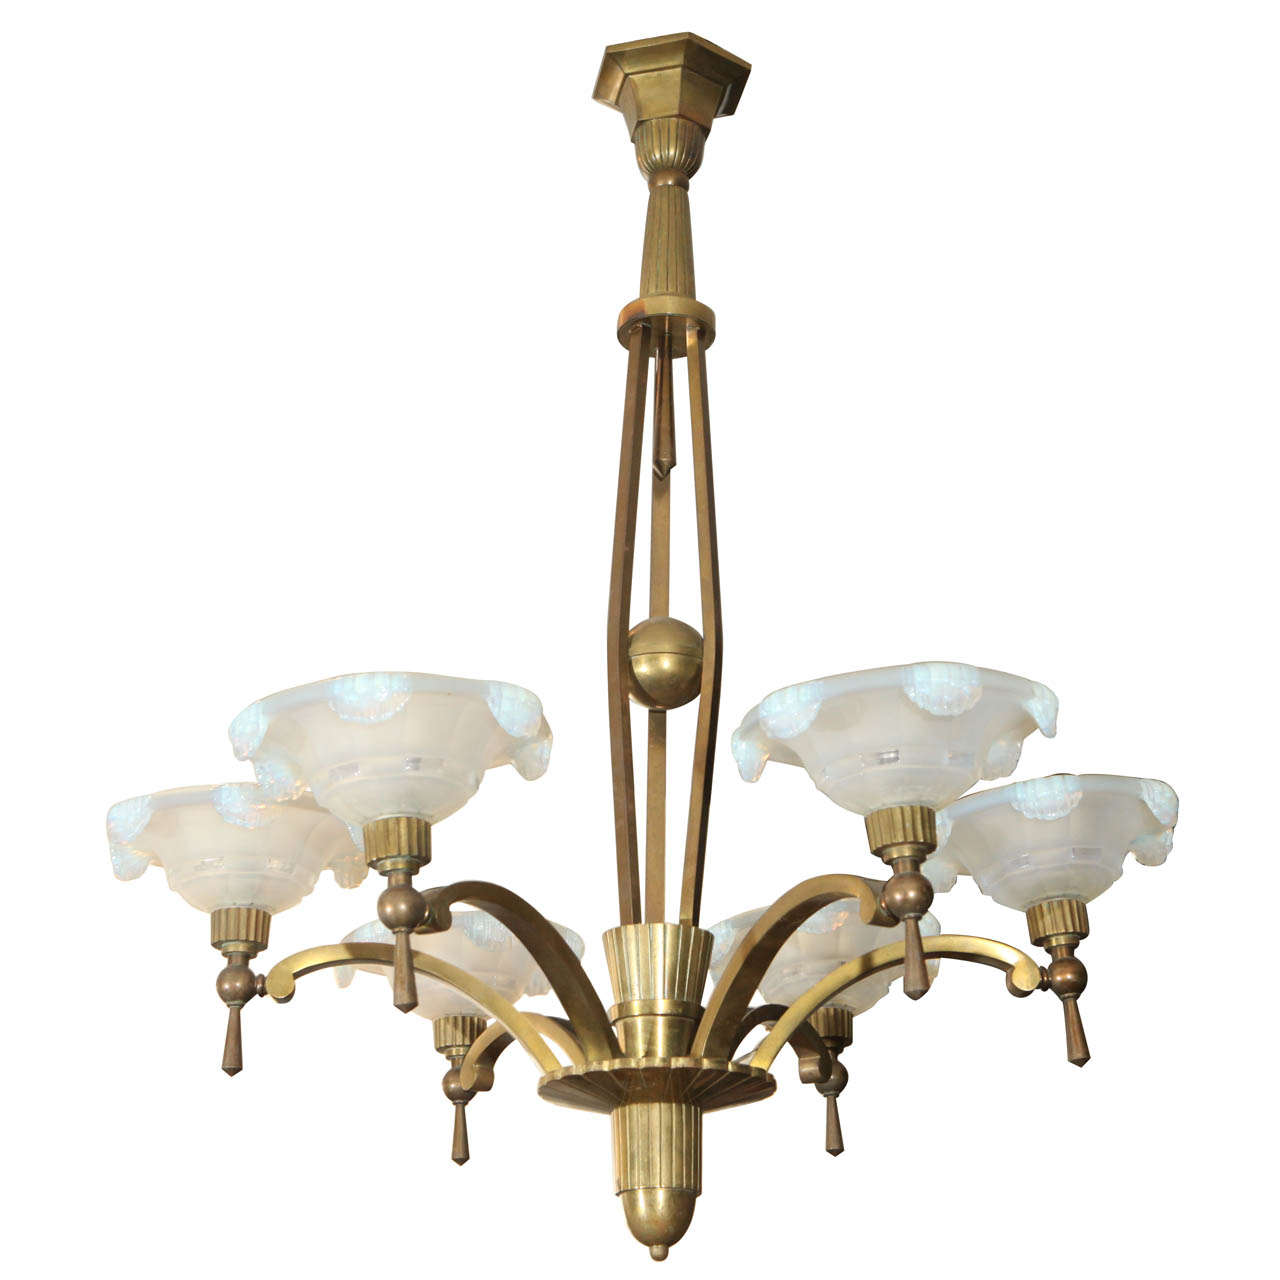 Petitot Chandelier with Waterfall Opaline Shades